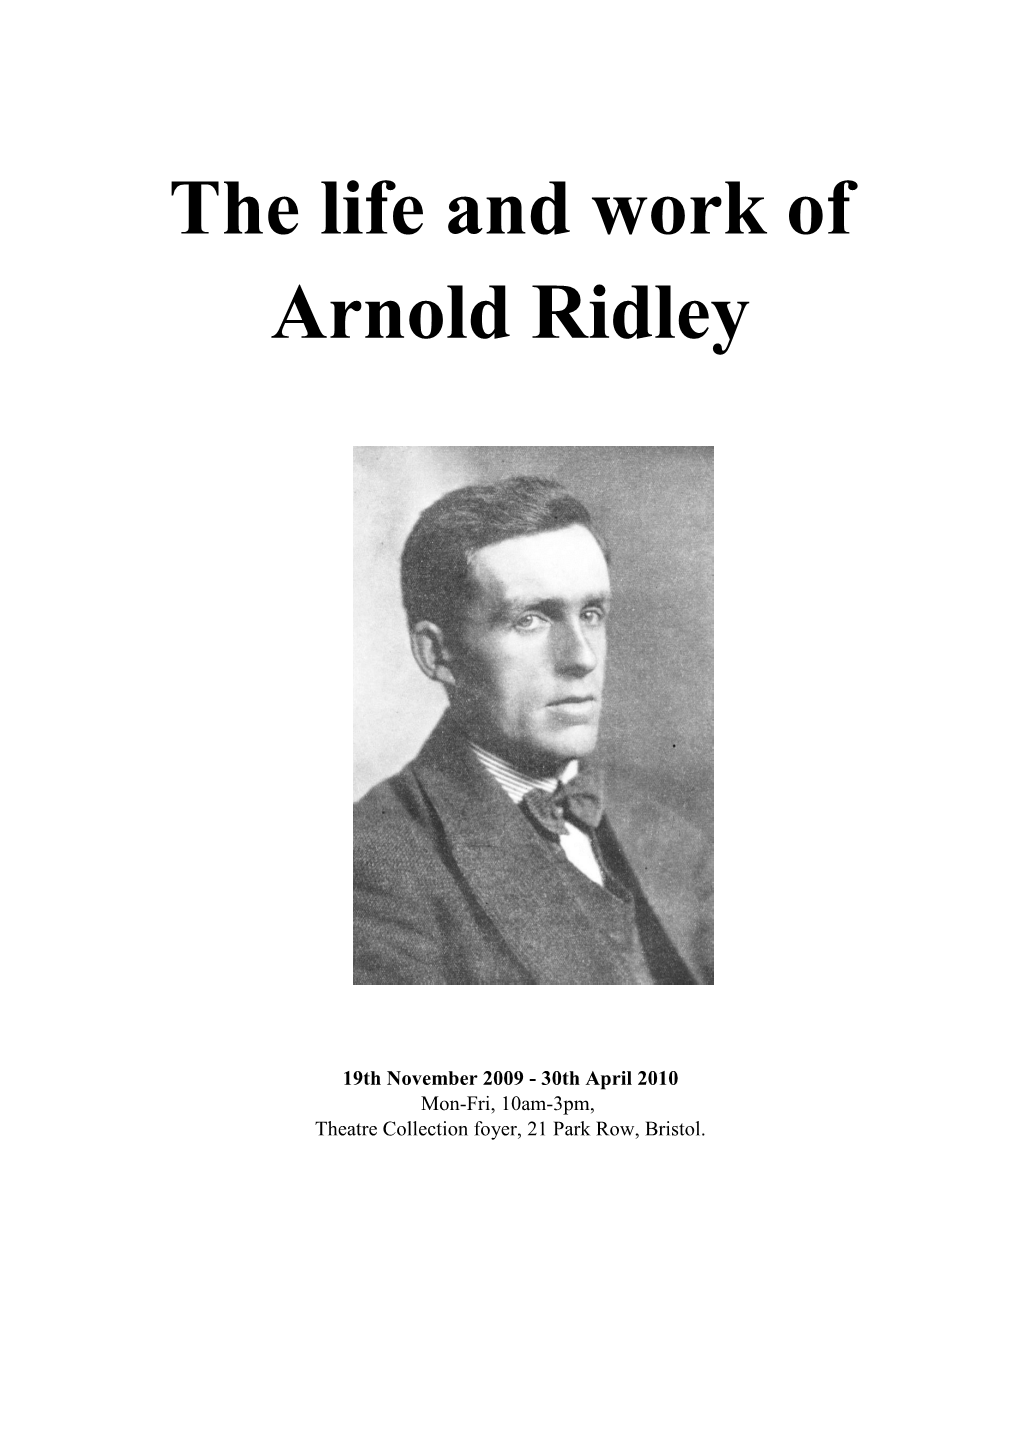 The Life and Work of Arnold Ridley